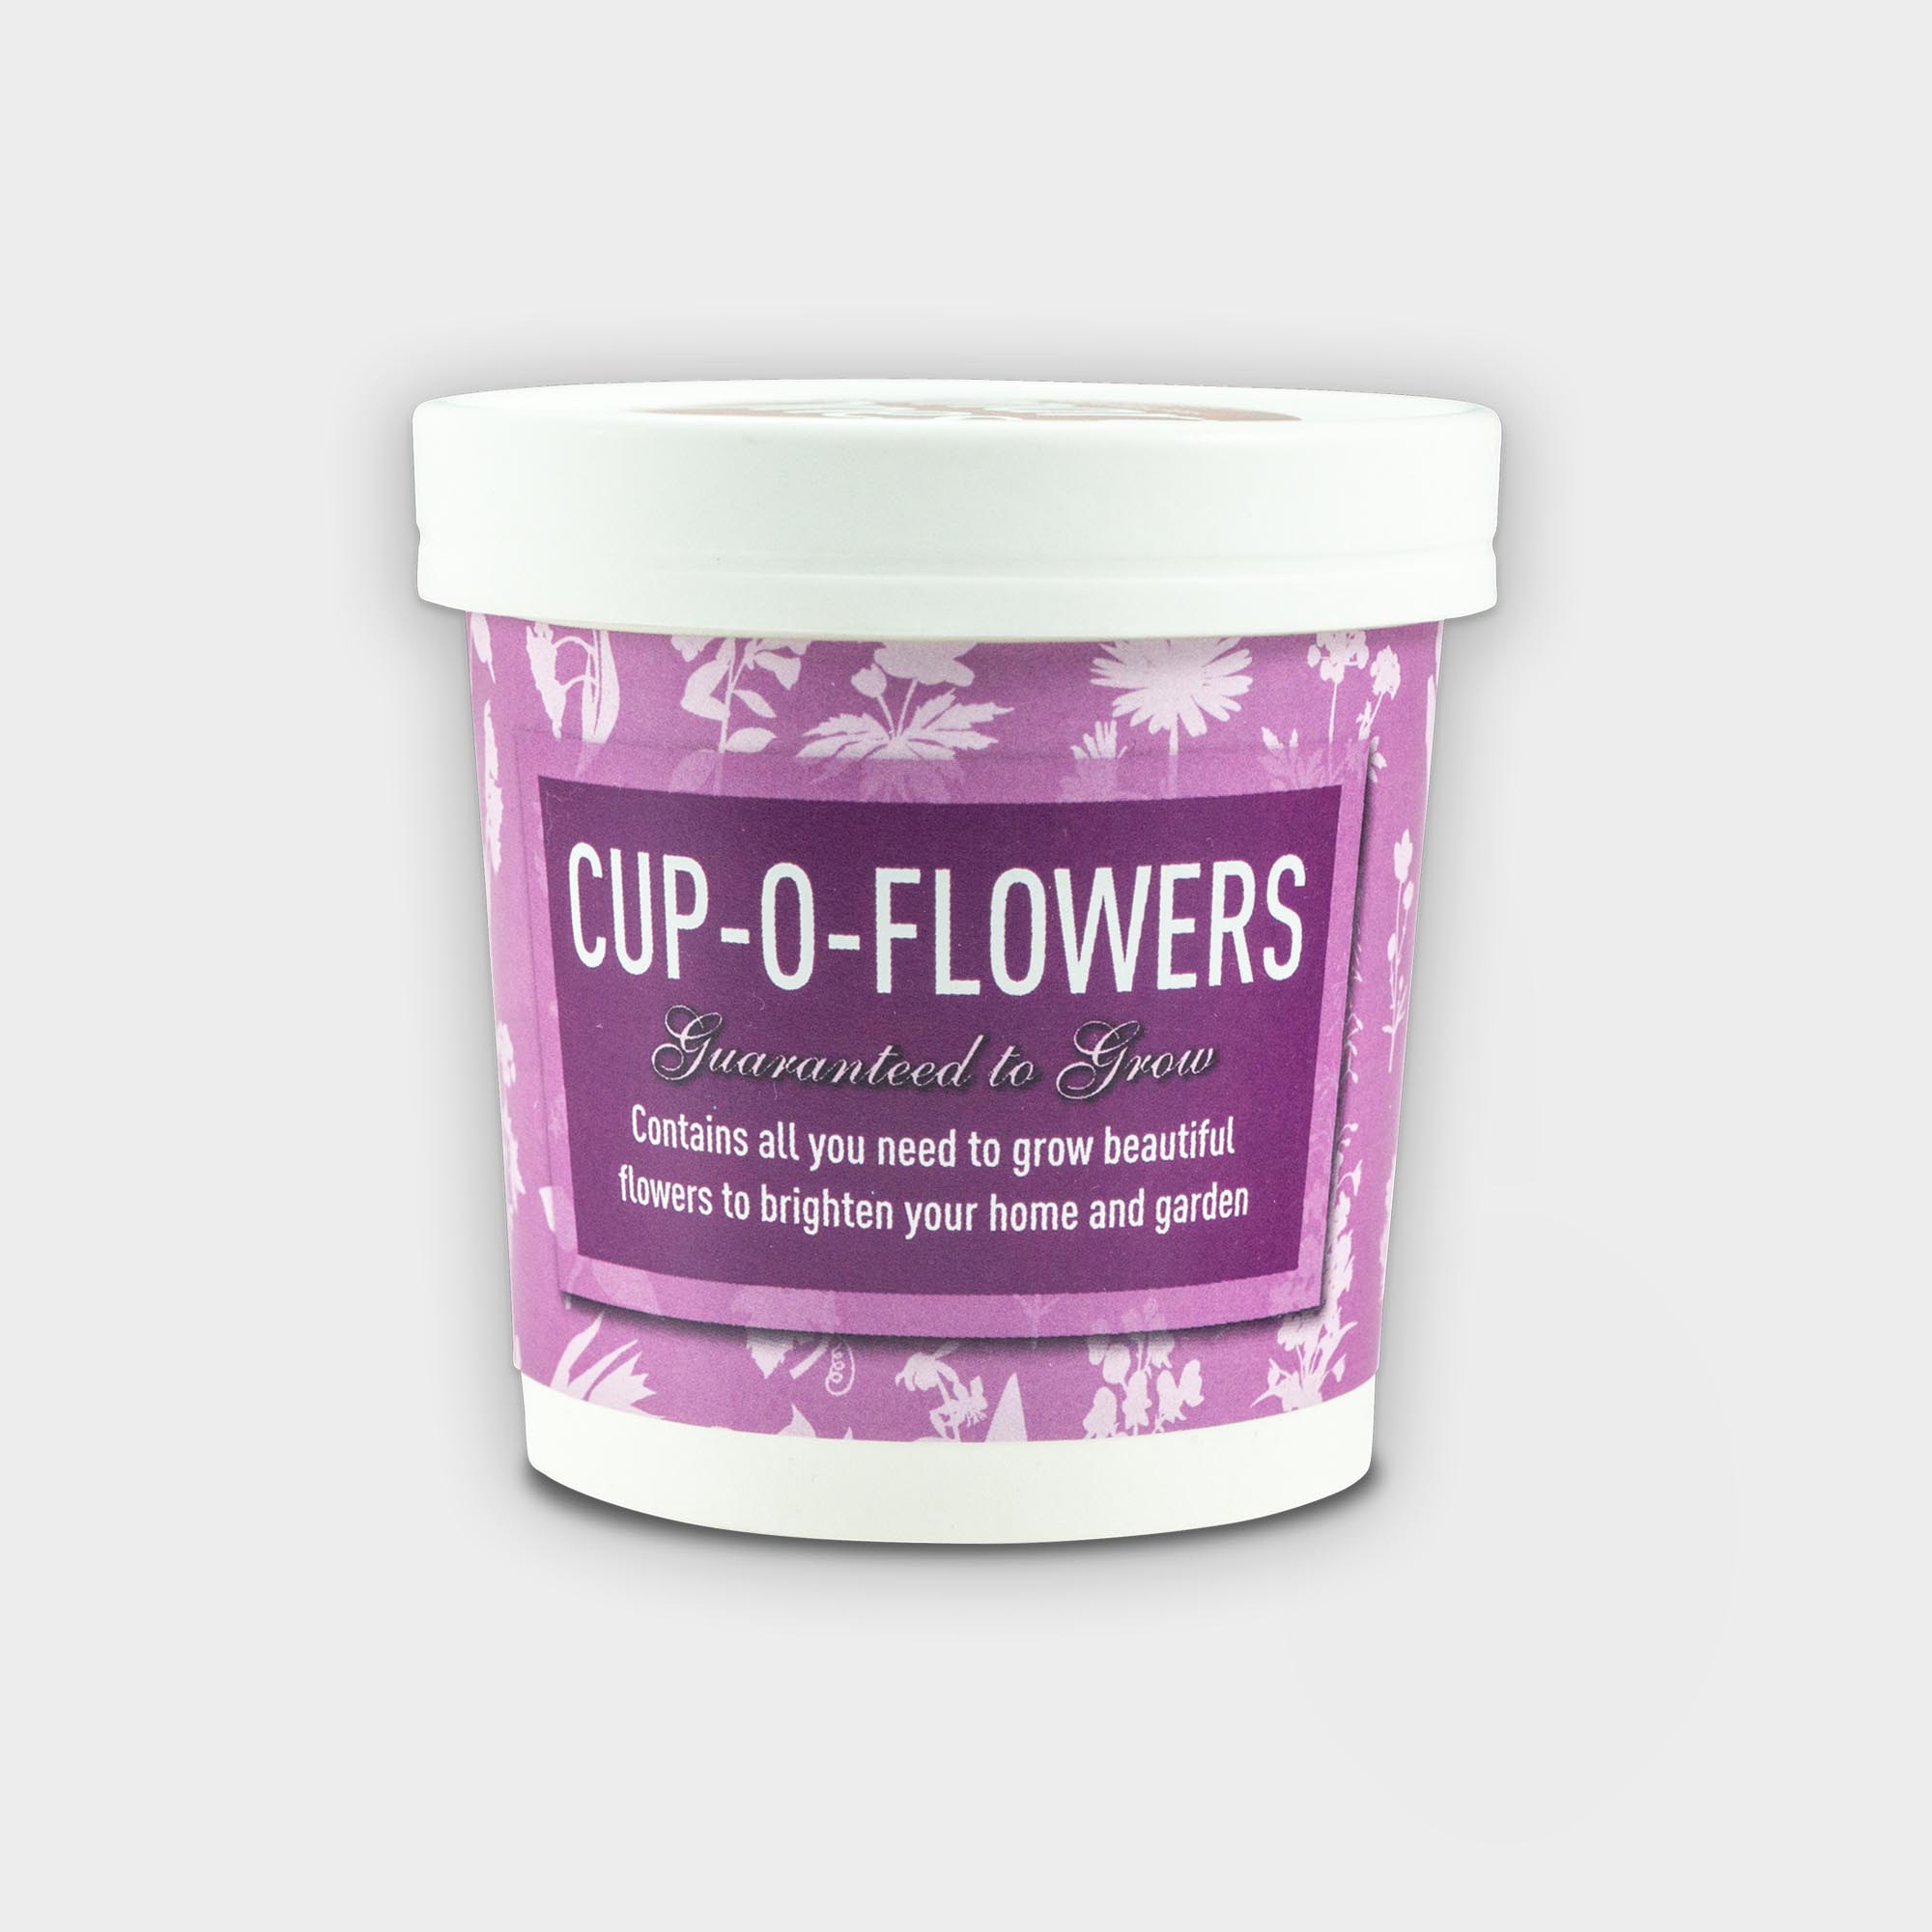 The Green & Good Seed Cup - Cup-o-Flowers. A fun way to grow your own flowers in a pot of their own. Just add water and watch them sprout in to life. The recyclable 12oz paper cup contains a seed packet, one compost tablet and sowing instructions. The lid of the cup is personalised with a paper label printed 4-col process from artwork supplied. Flowers available: Sunflower, Cosmos, Forget Me Not, Cornflower, Sweet Pea, Daisy, Summer Flowers, Butterfly & Bee Mix, Wildflower Mix.